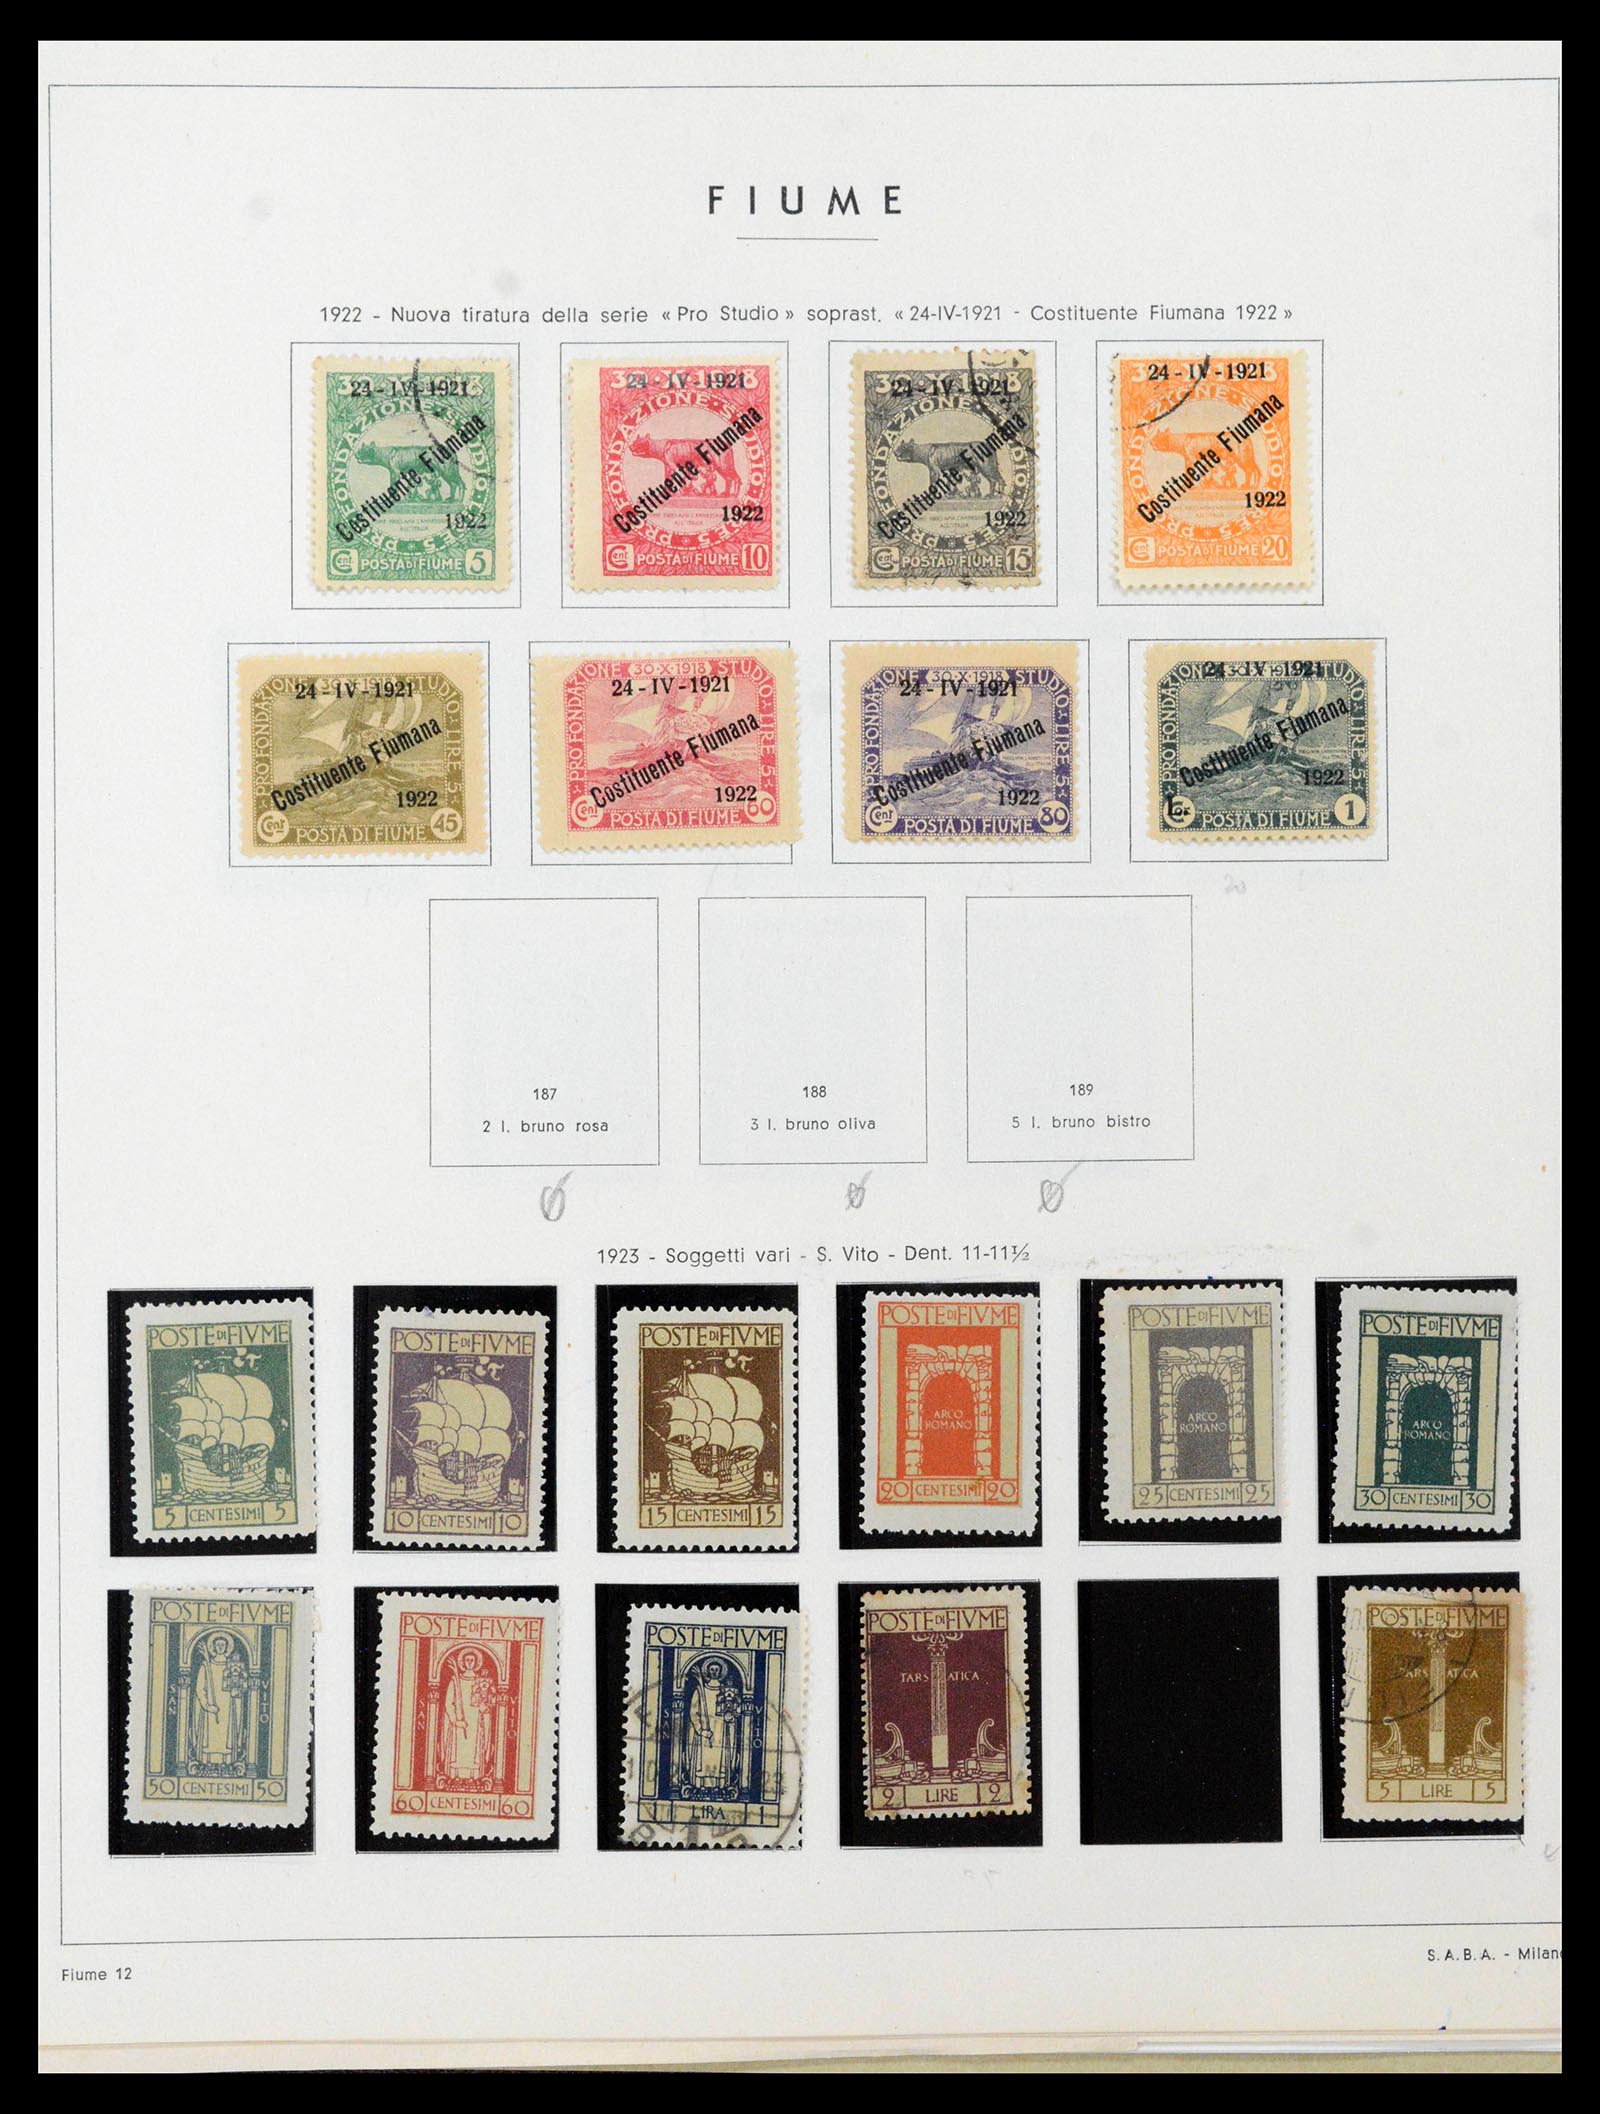 38506 0013 - Stamp collection 38506 Fiume 1920-1924.